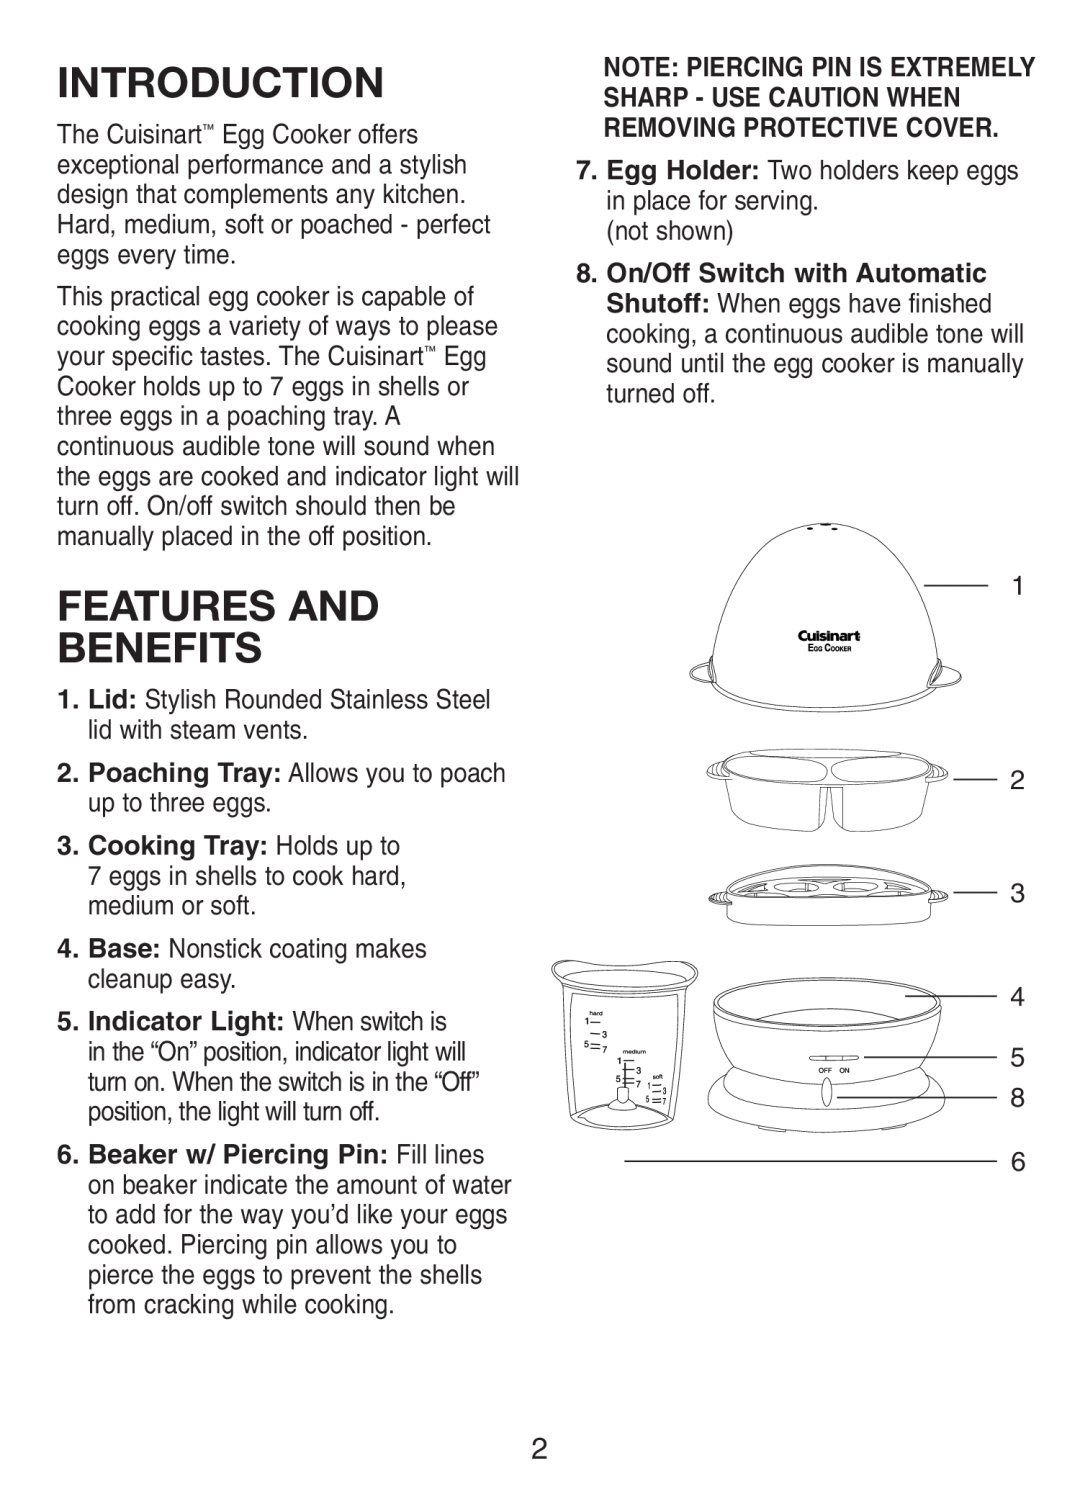 Cuisinart IB-BIO51 manual Introduction, Features And Benefits, Lid Stylish Rounded Stainless Steel lid with steam vents 